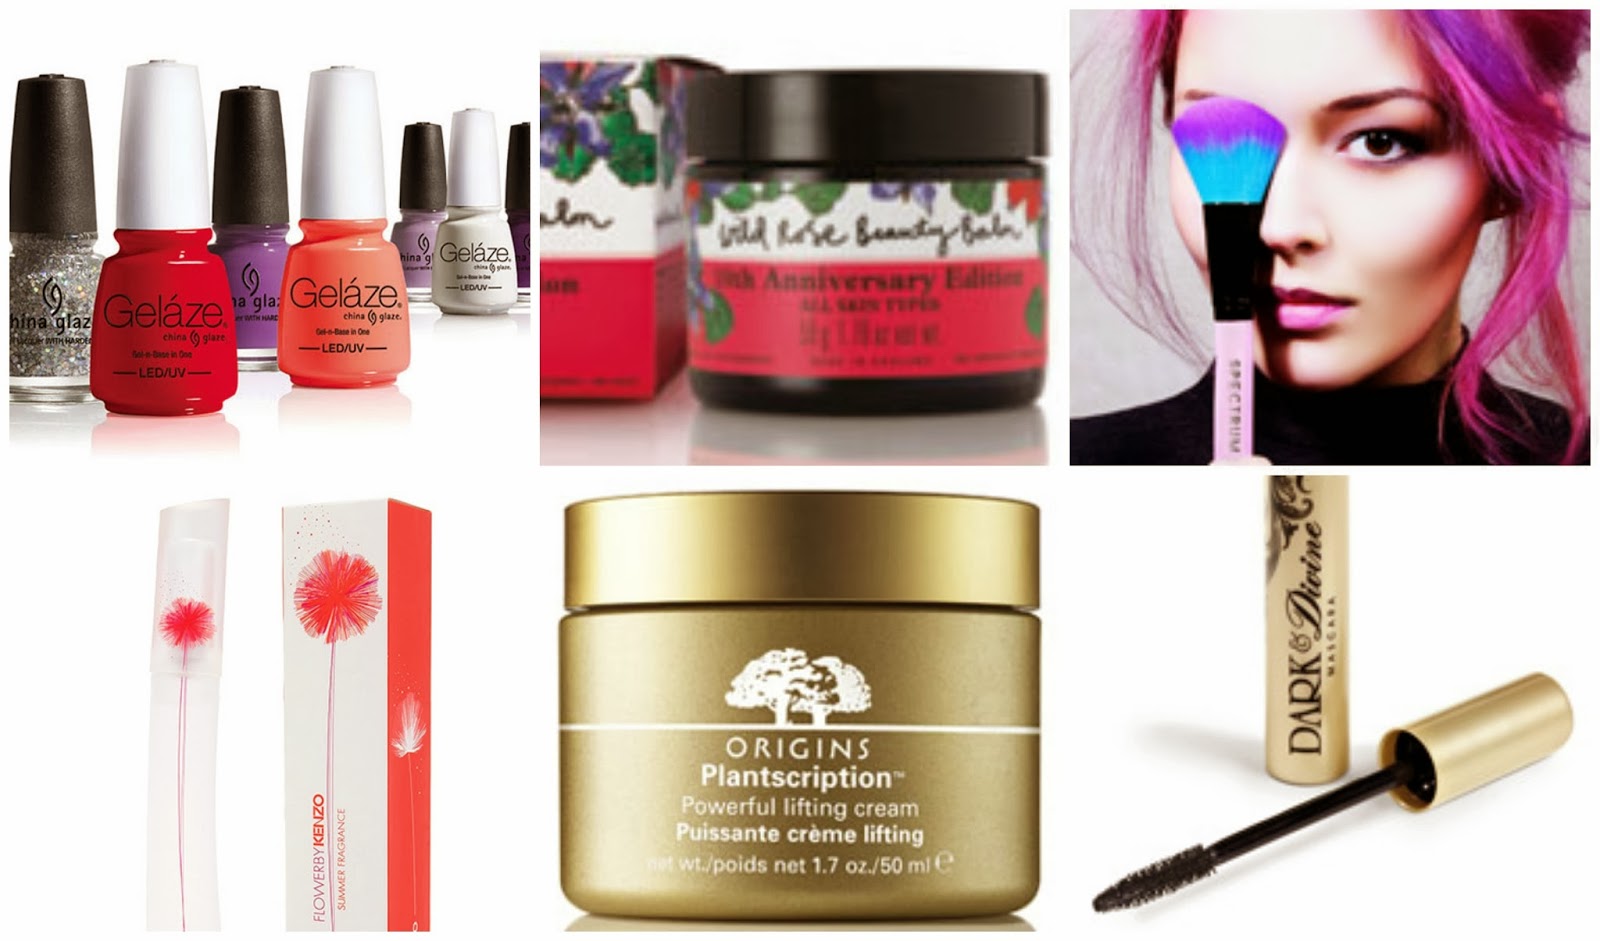 The Daily Beauty Report (11.02.14)